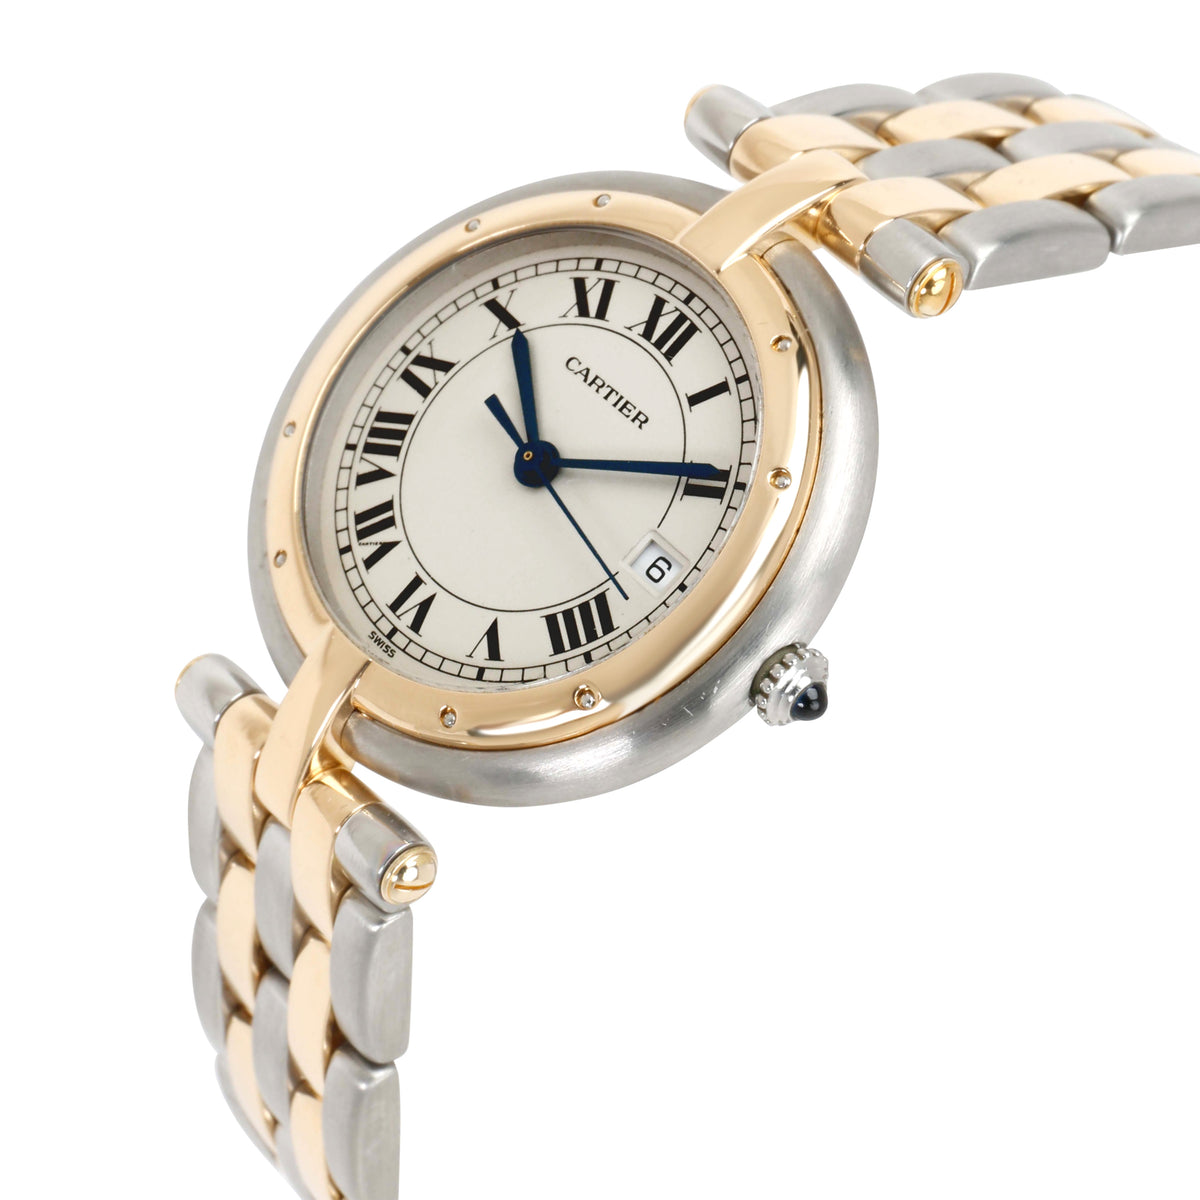 Cartier Panthere 183964 Unisex Watch in 18kt Stainless Steel/Yellow Gold